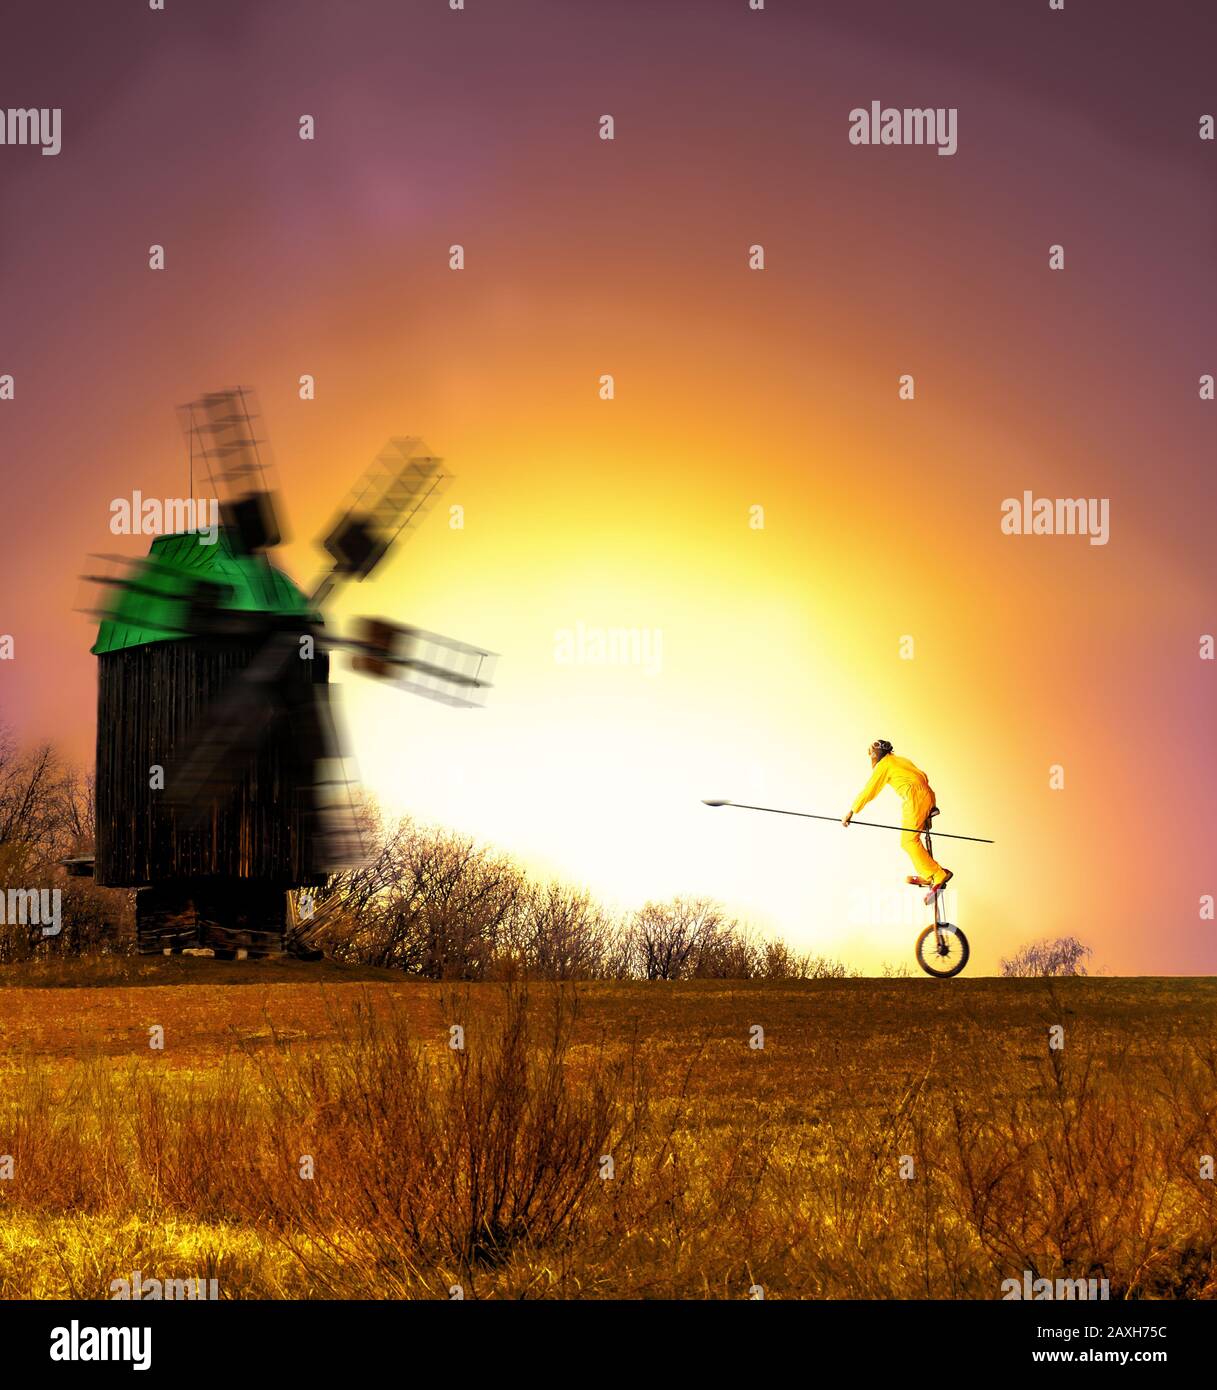 a clown on a unicycle riding with a lance in his hand towards the windmil during sunset. Stock Photo